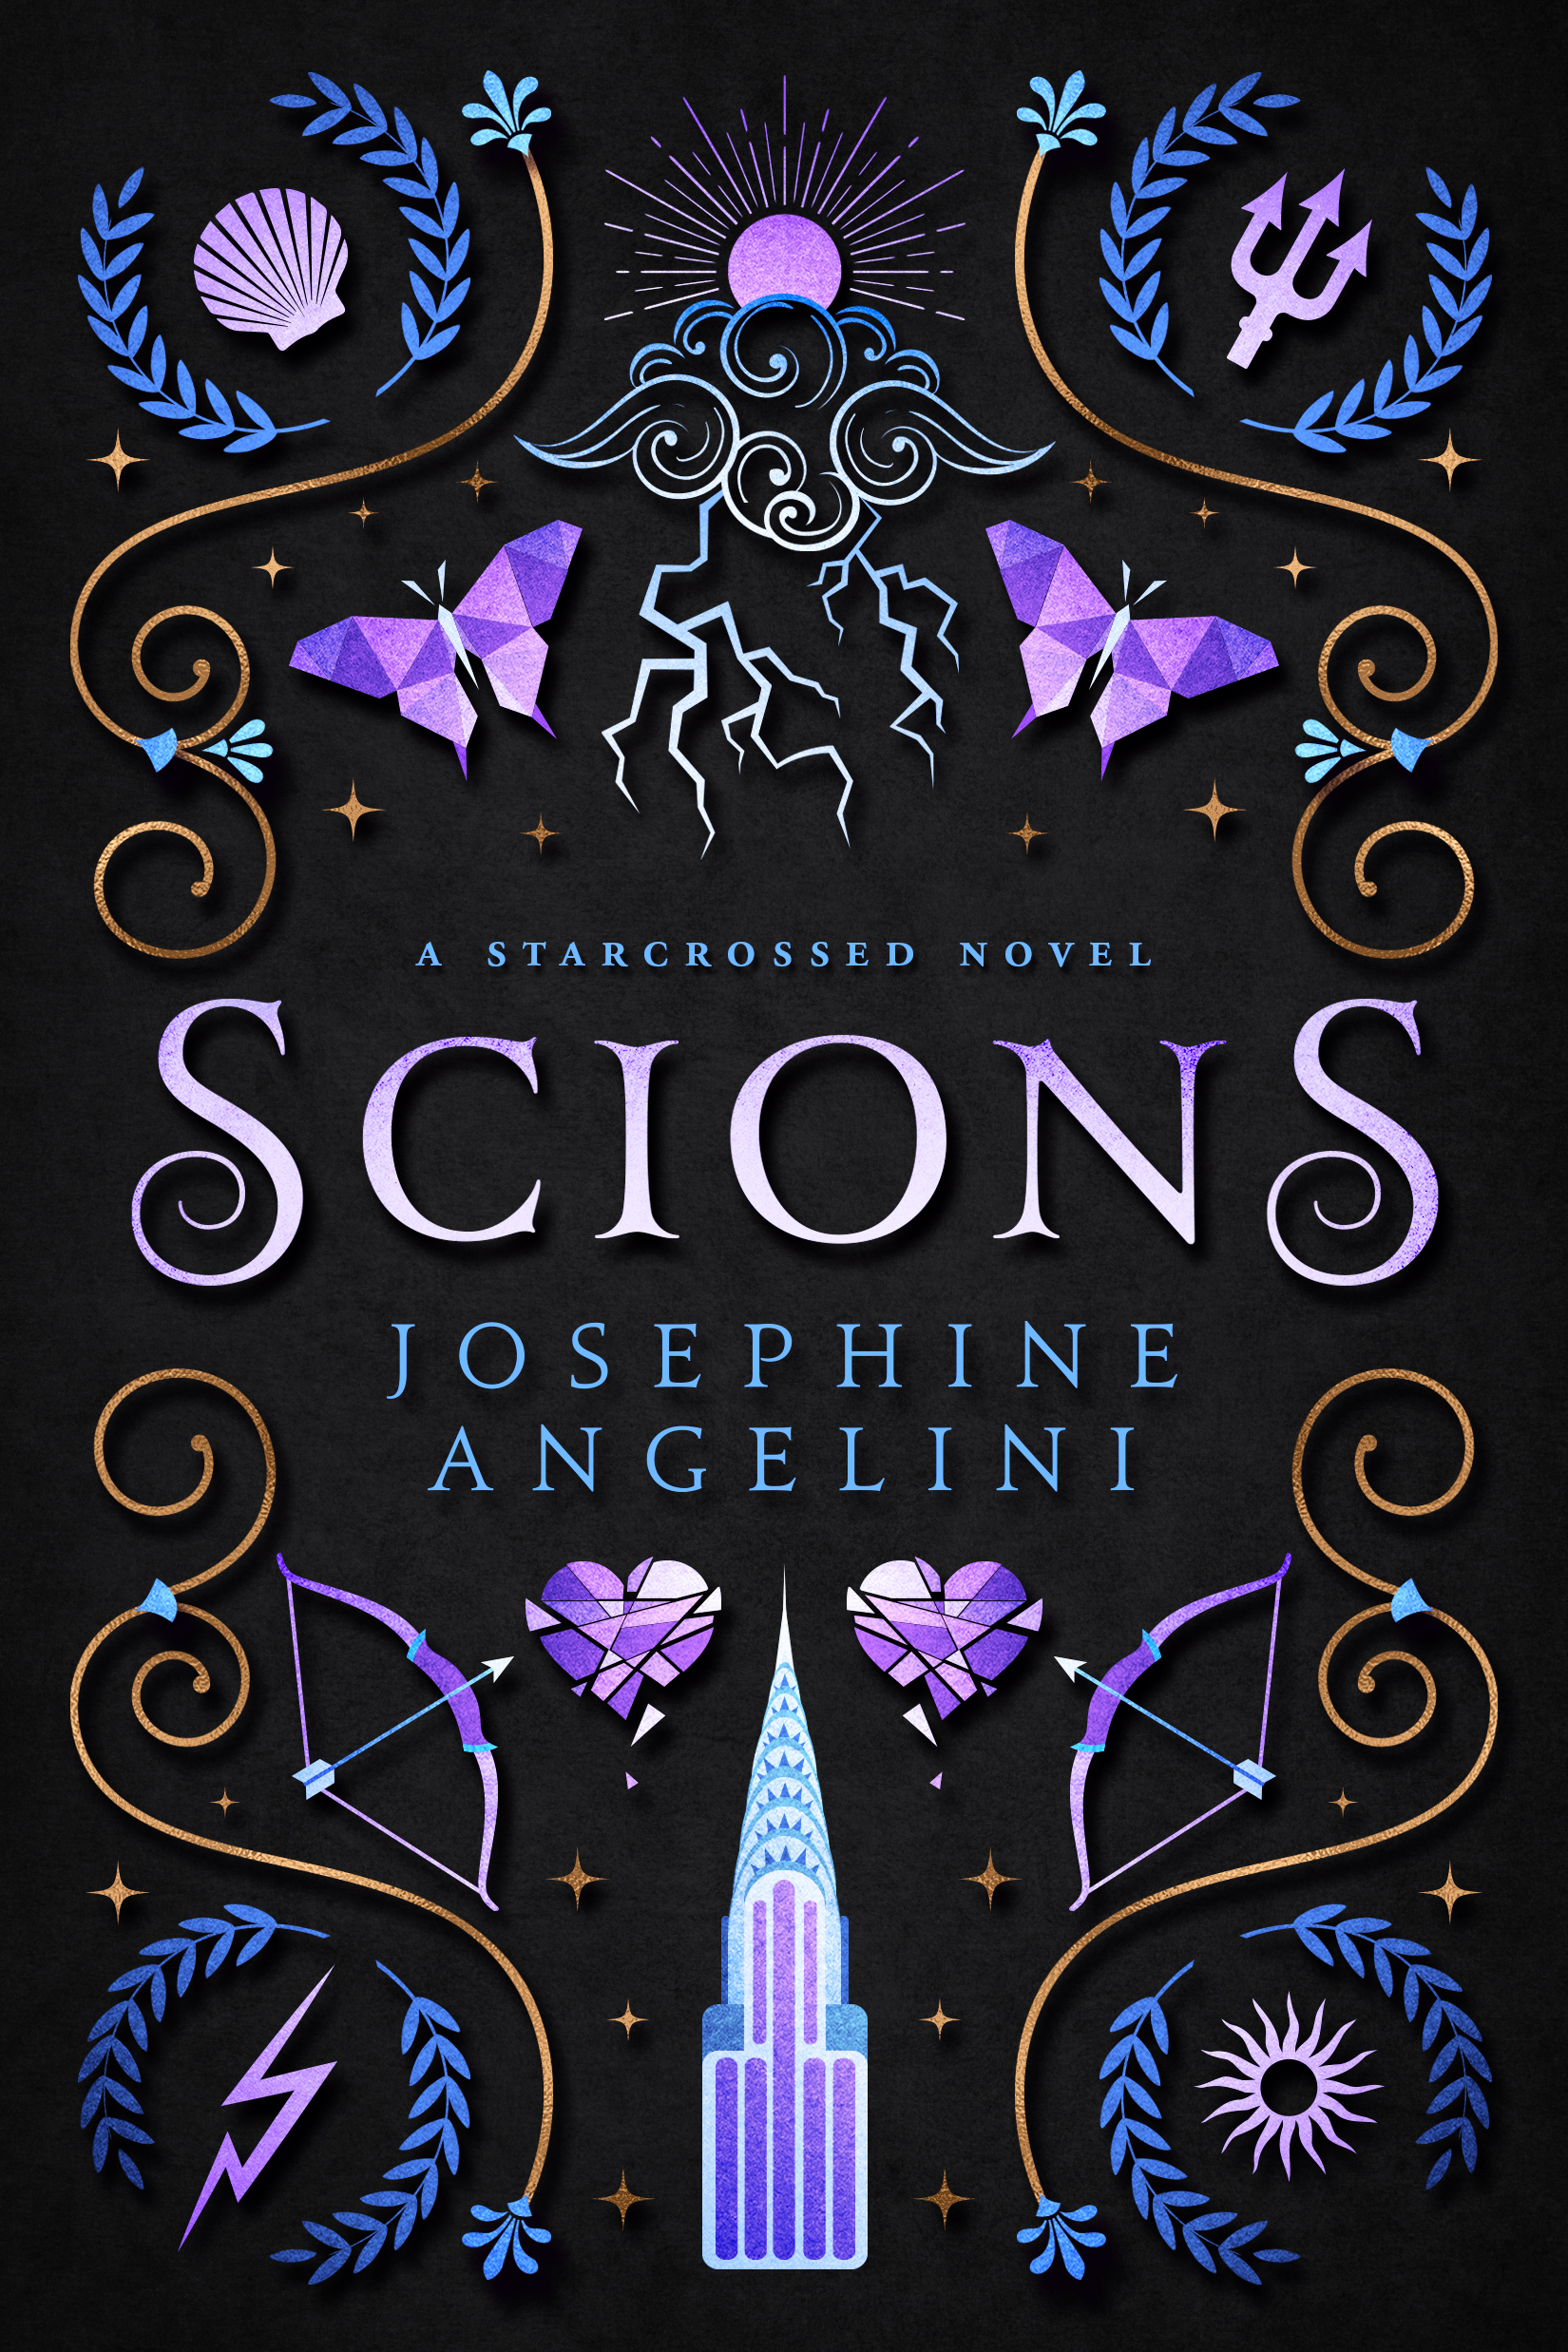  Scions : A Starcrossed novel